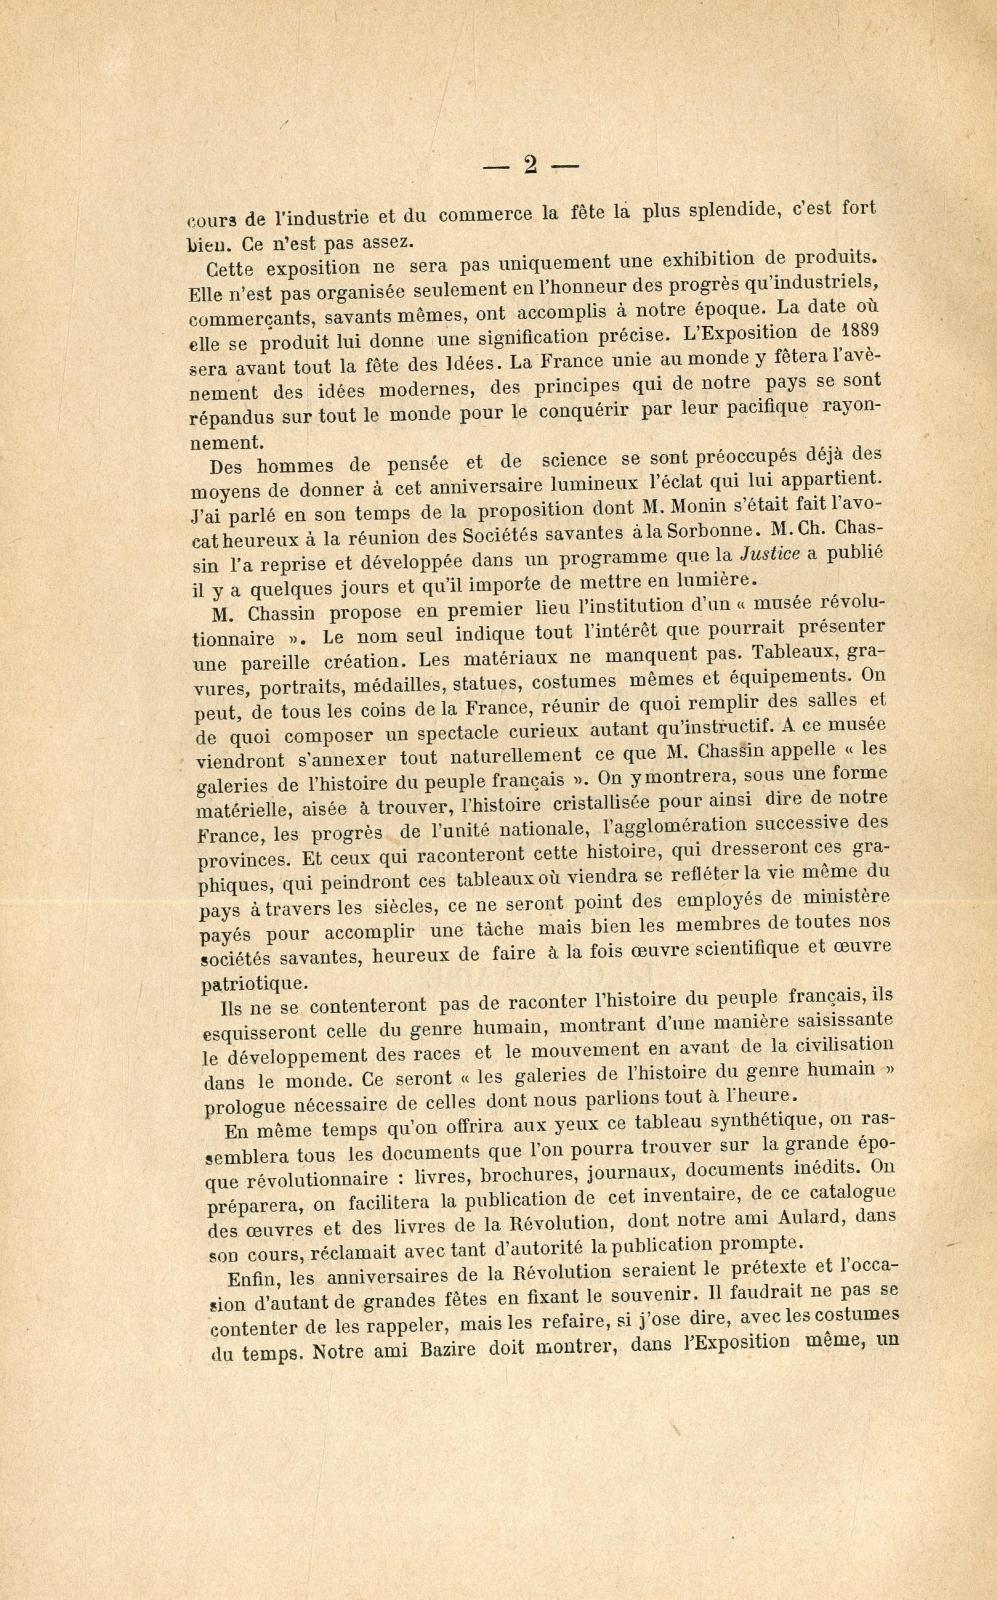 Le Centaire nationale : 1789-1889